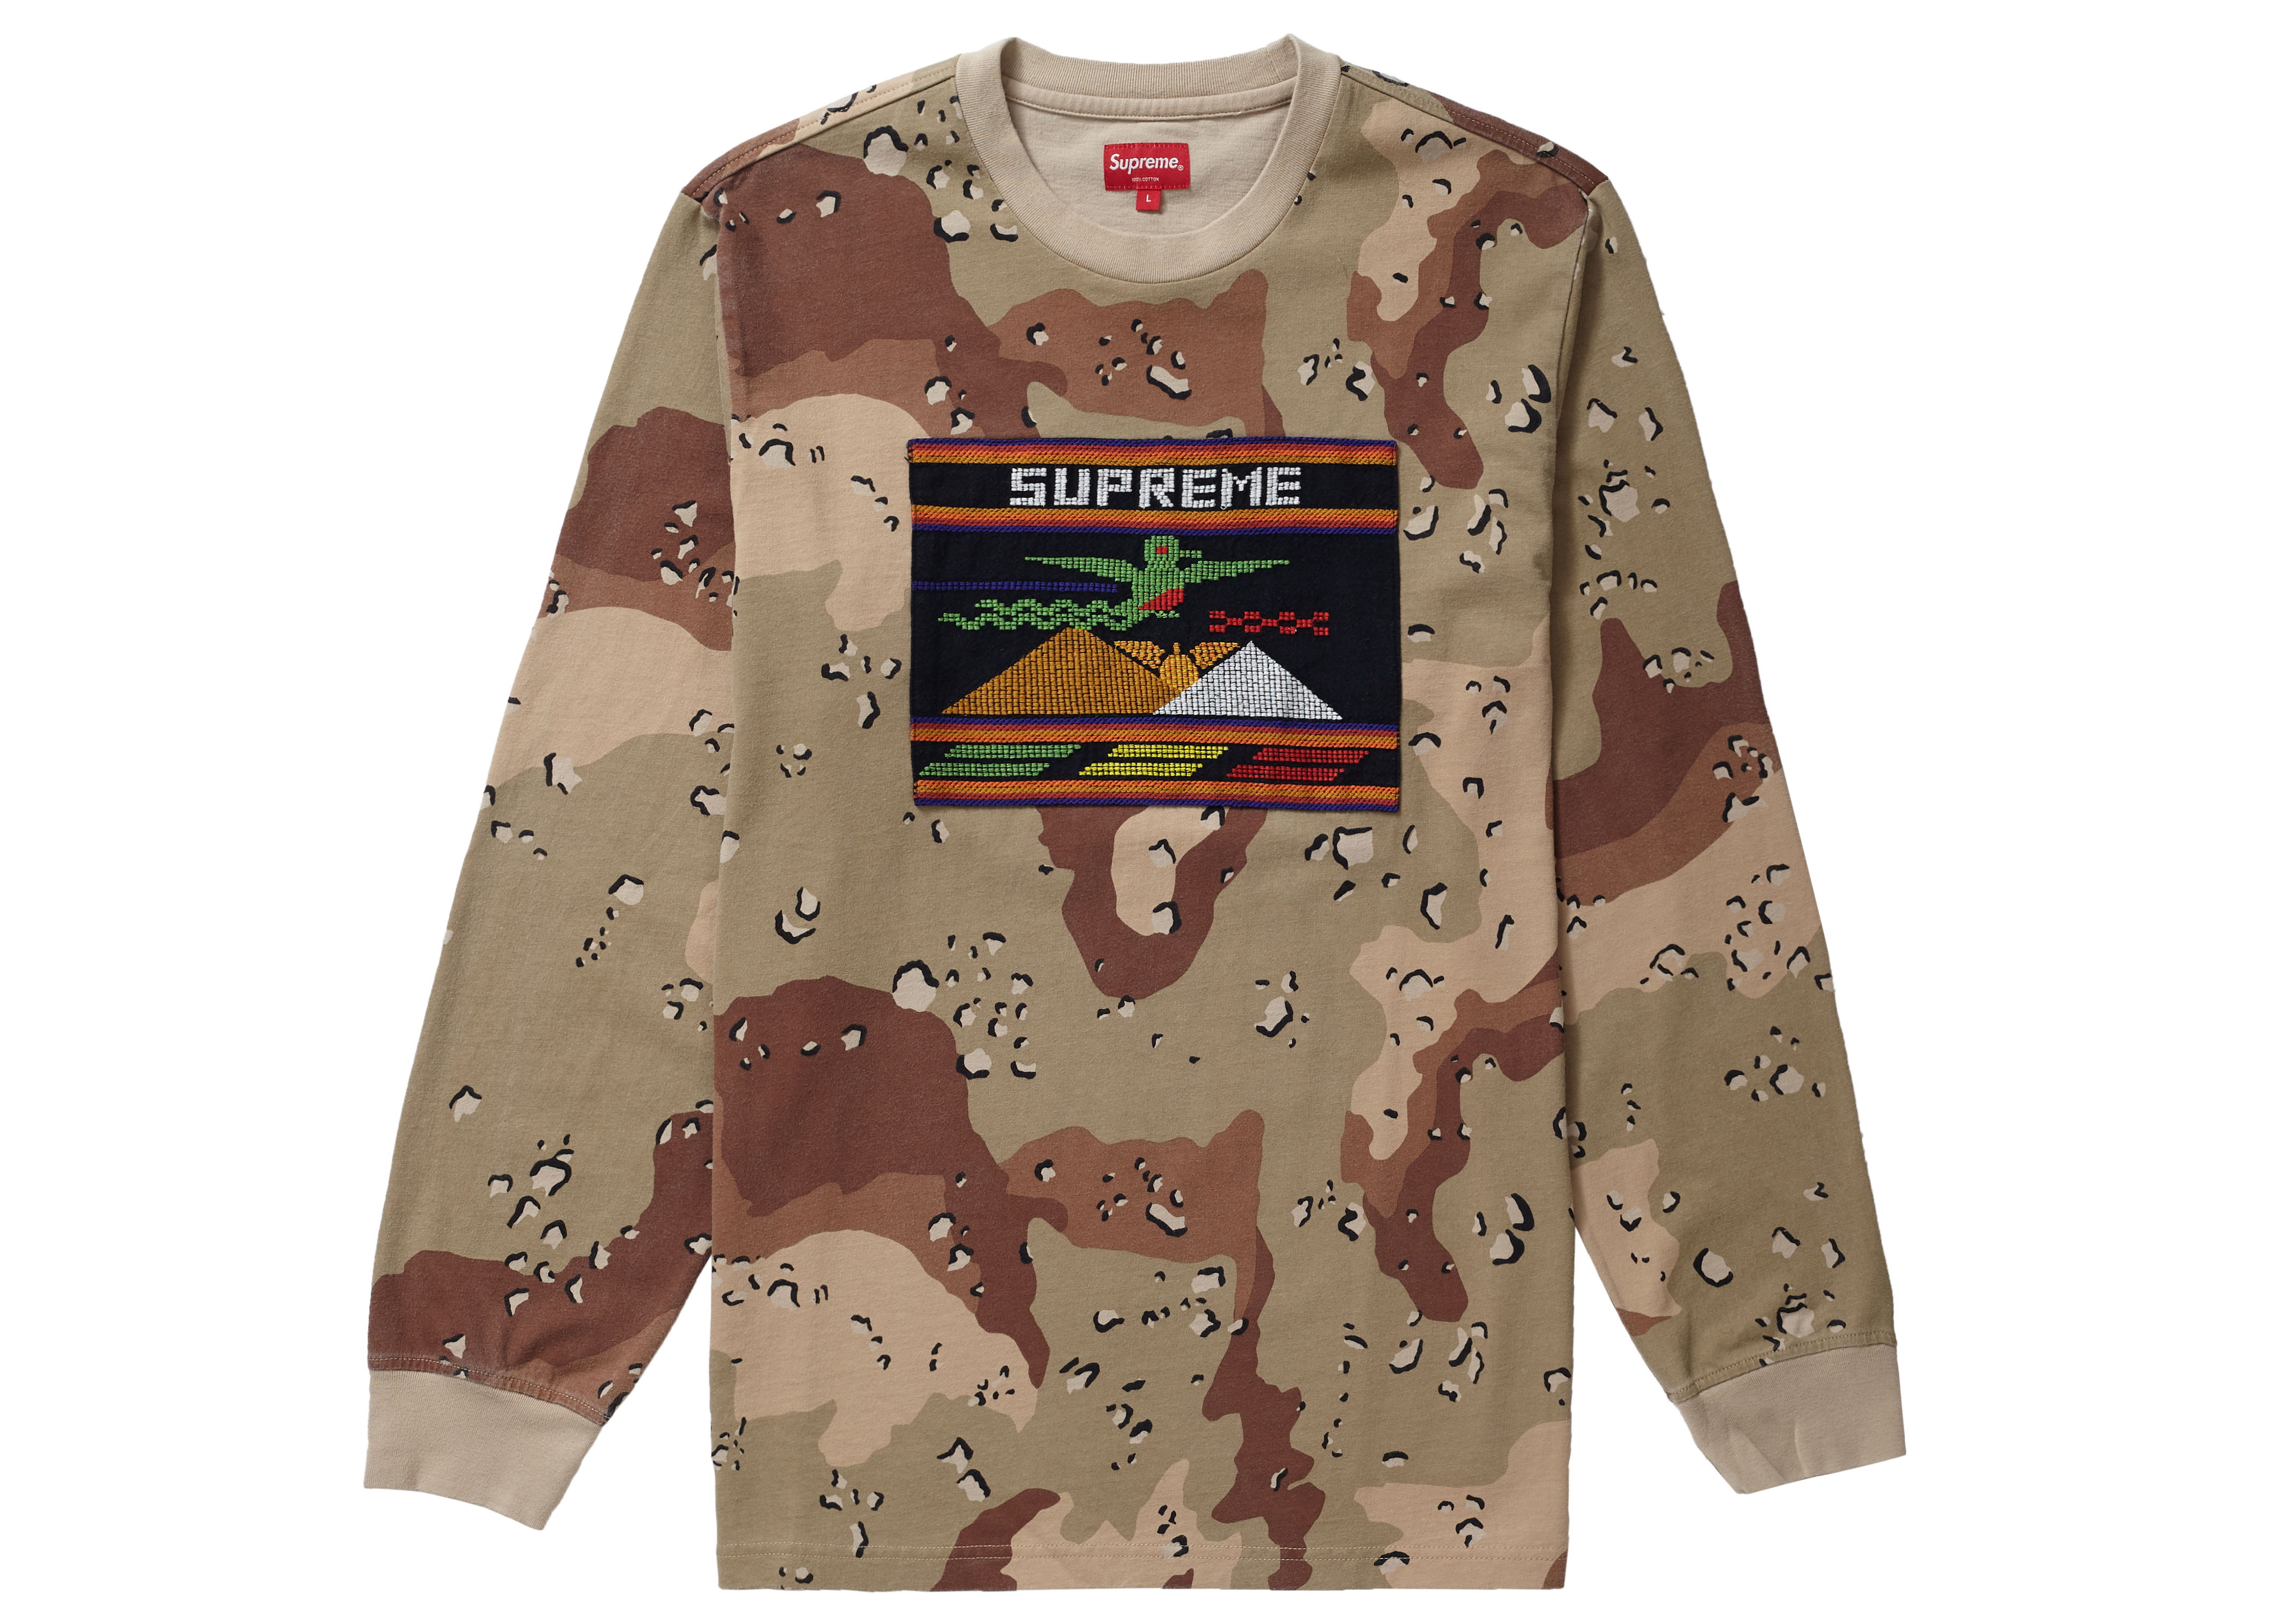 Supreme Needlepoint Patch L/S Top Chocolate Chip Camo Men's - SS19